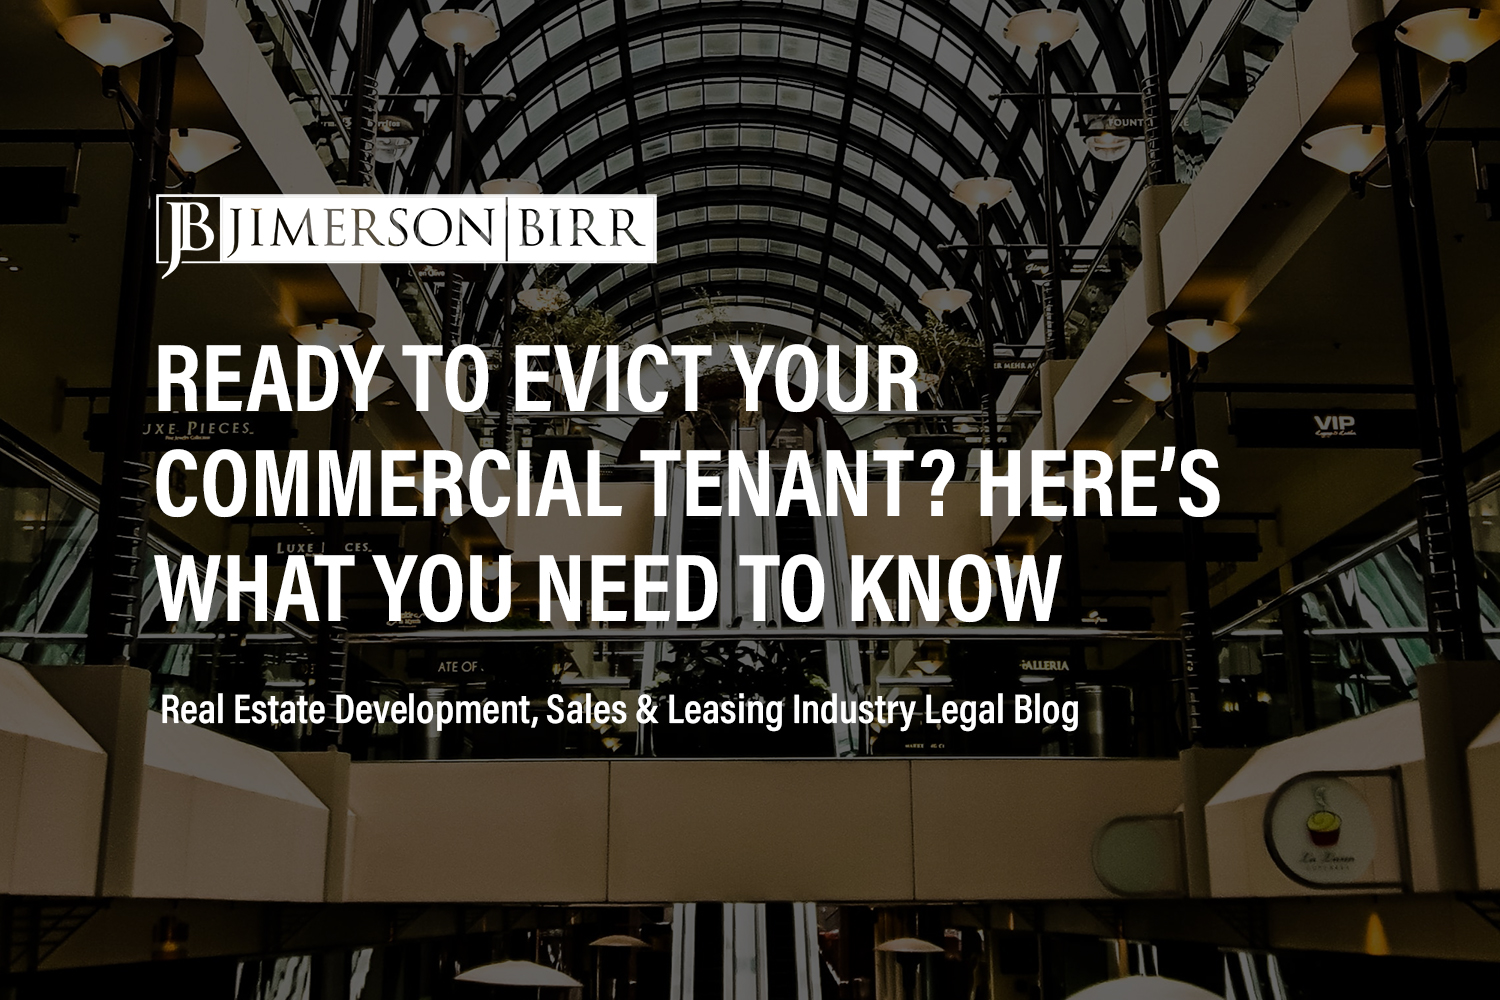 I Want to Evict My Commercial Tenant! What Do I Need to Know? Common Defenses to a Commercial Eviction Action